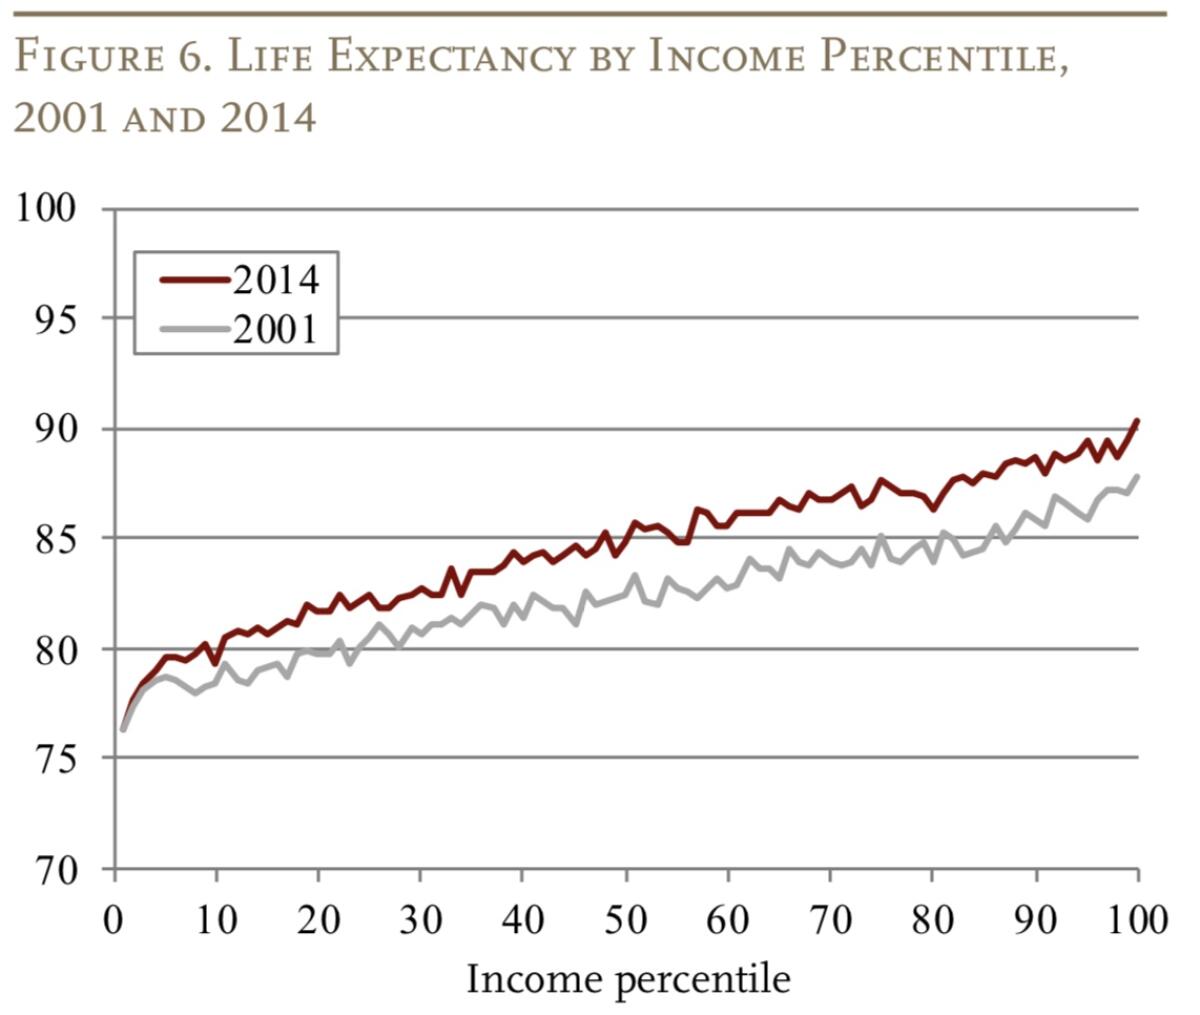 Life expectancy has been rising for the wealthy faster than everyone else — and the gap has broadened since the turn of the century.